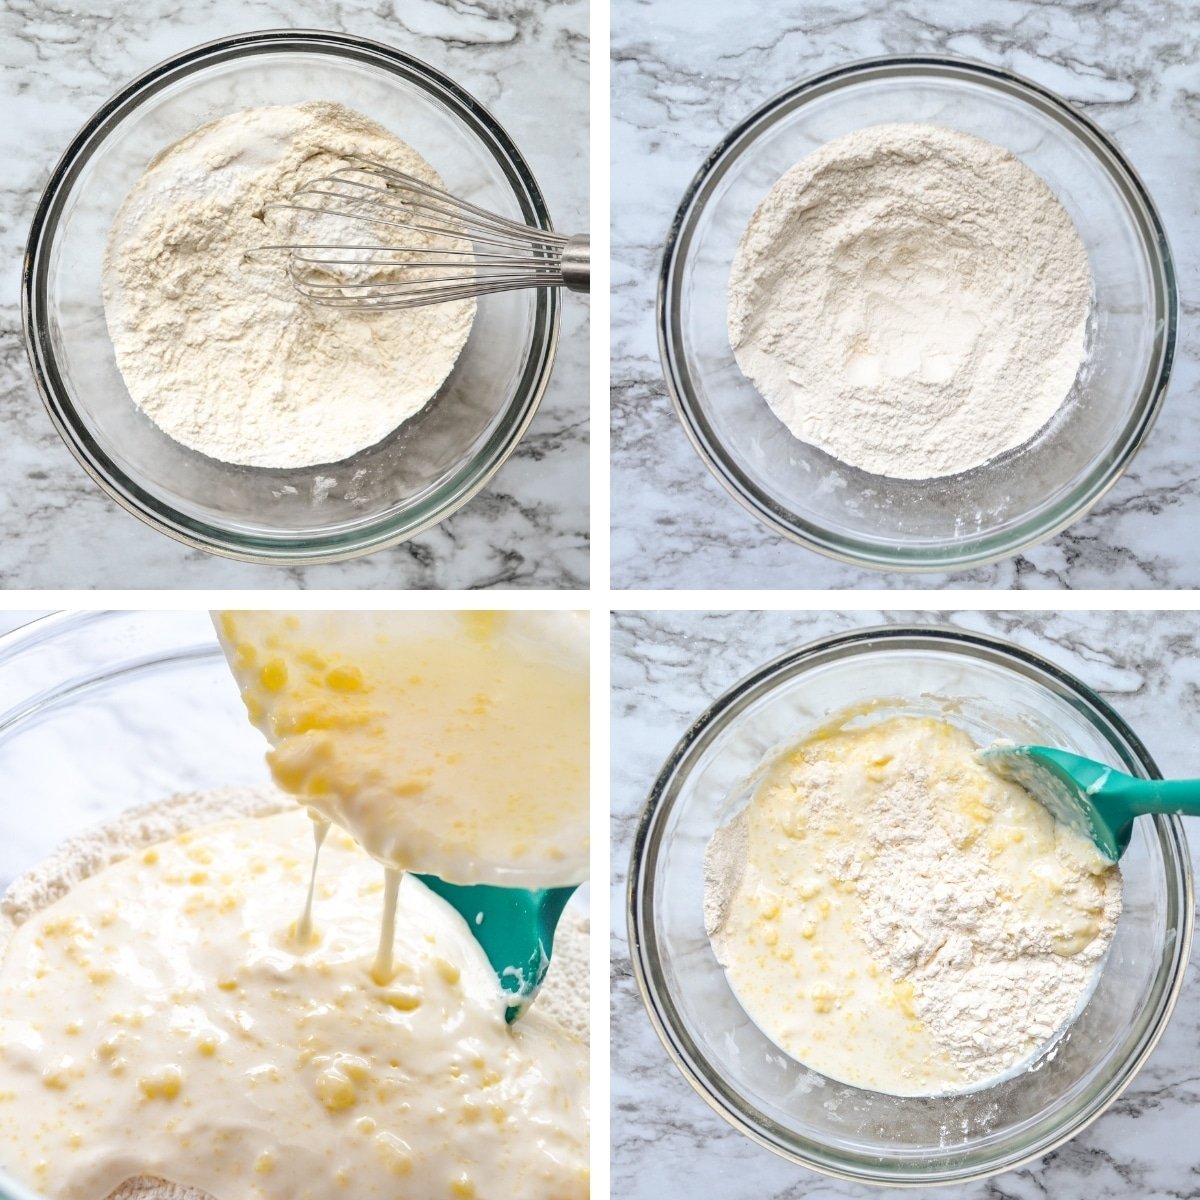 Images detailing how to make sourdough discard drop biscuits. See text recipe for more information.